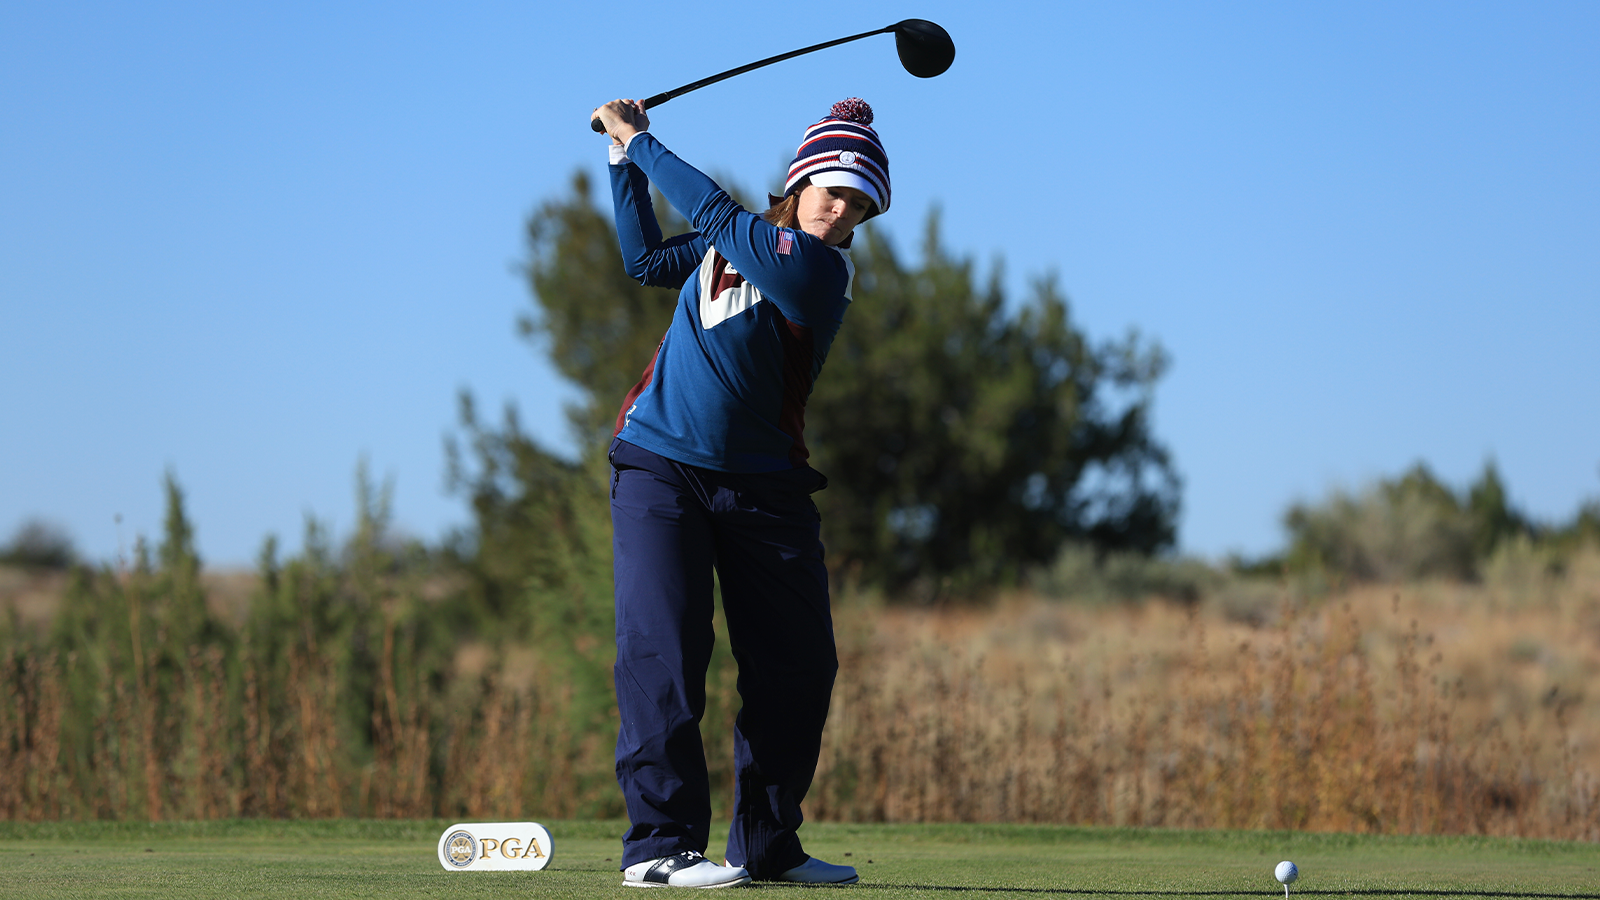 Stephanie Connelly-Eiswerth of the U.S. Team hits her tee shot on the first hole during the first round of the 2nd Women’s PGA Cup at Twin Warriors Golf Club on Thursday, October 27, 2022 in Santa Ana Pueblo, New Mexico. (Photo by Sam Greenwood/PGA of America)